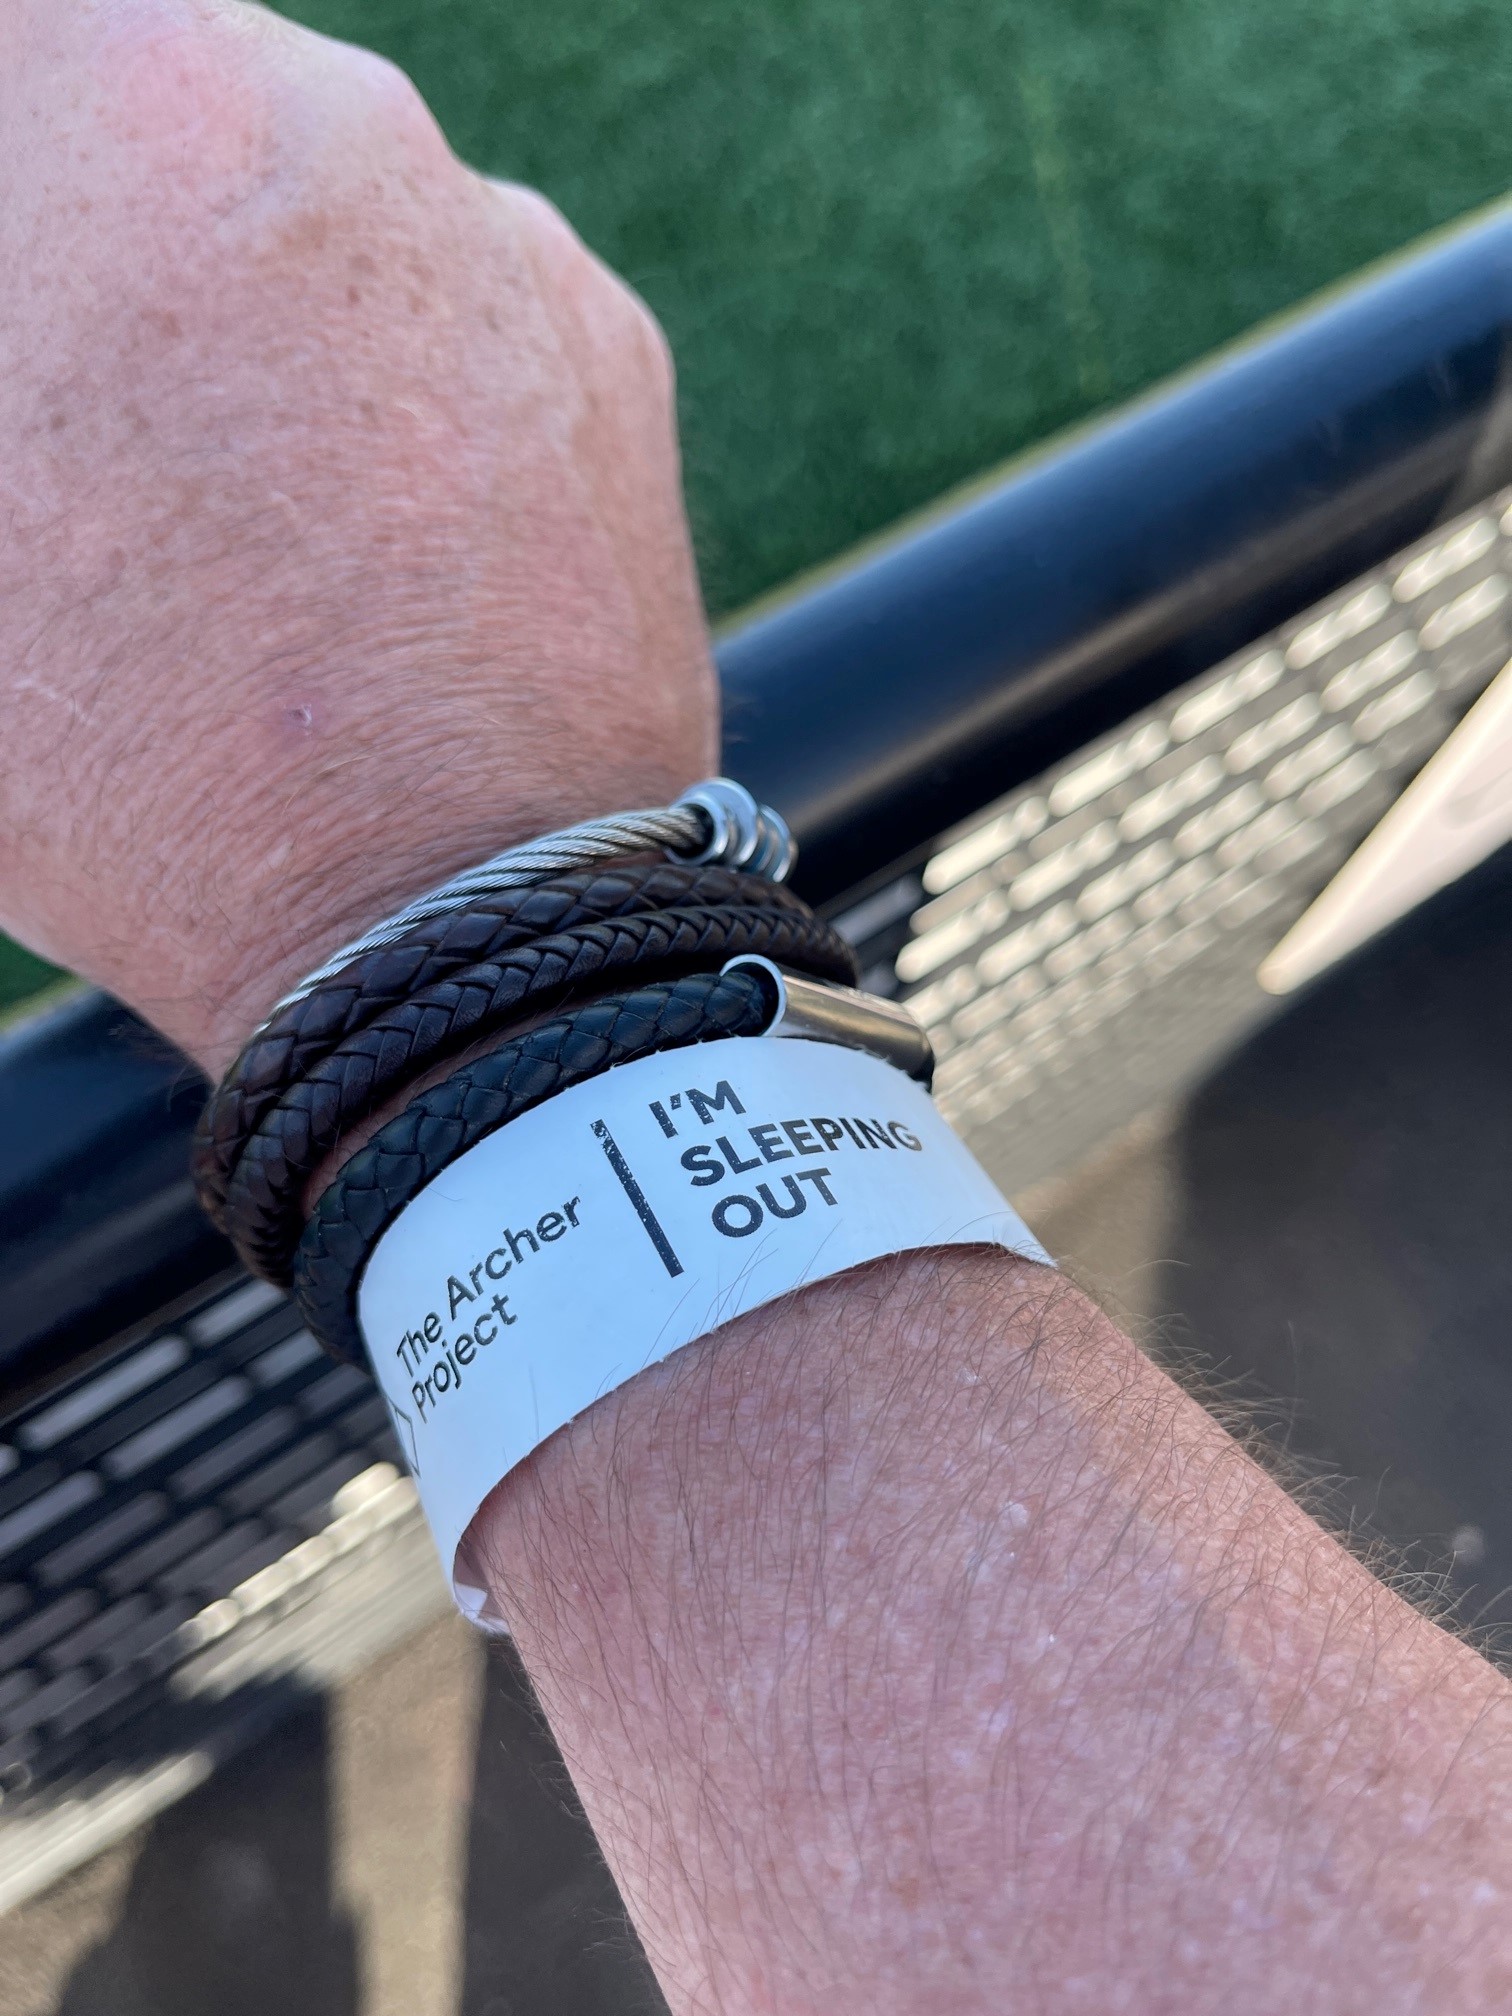 Archer project sleep out wrist band